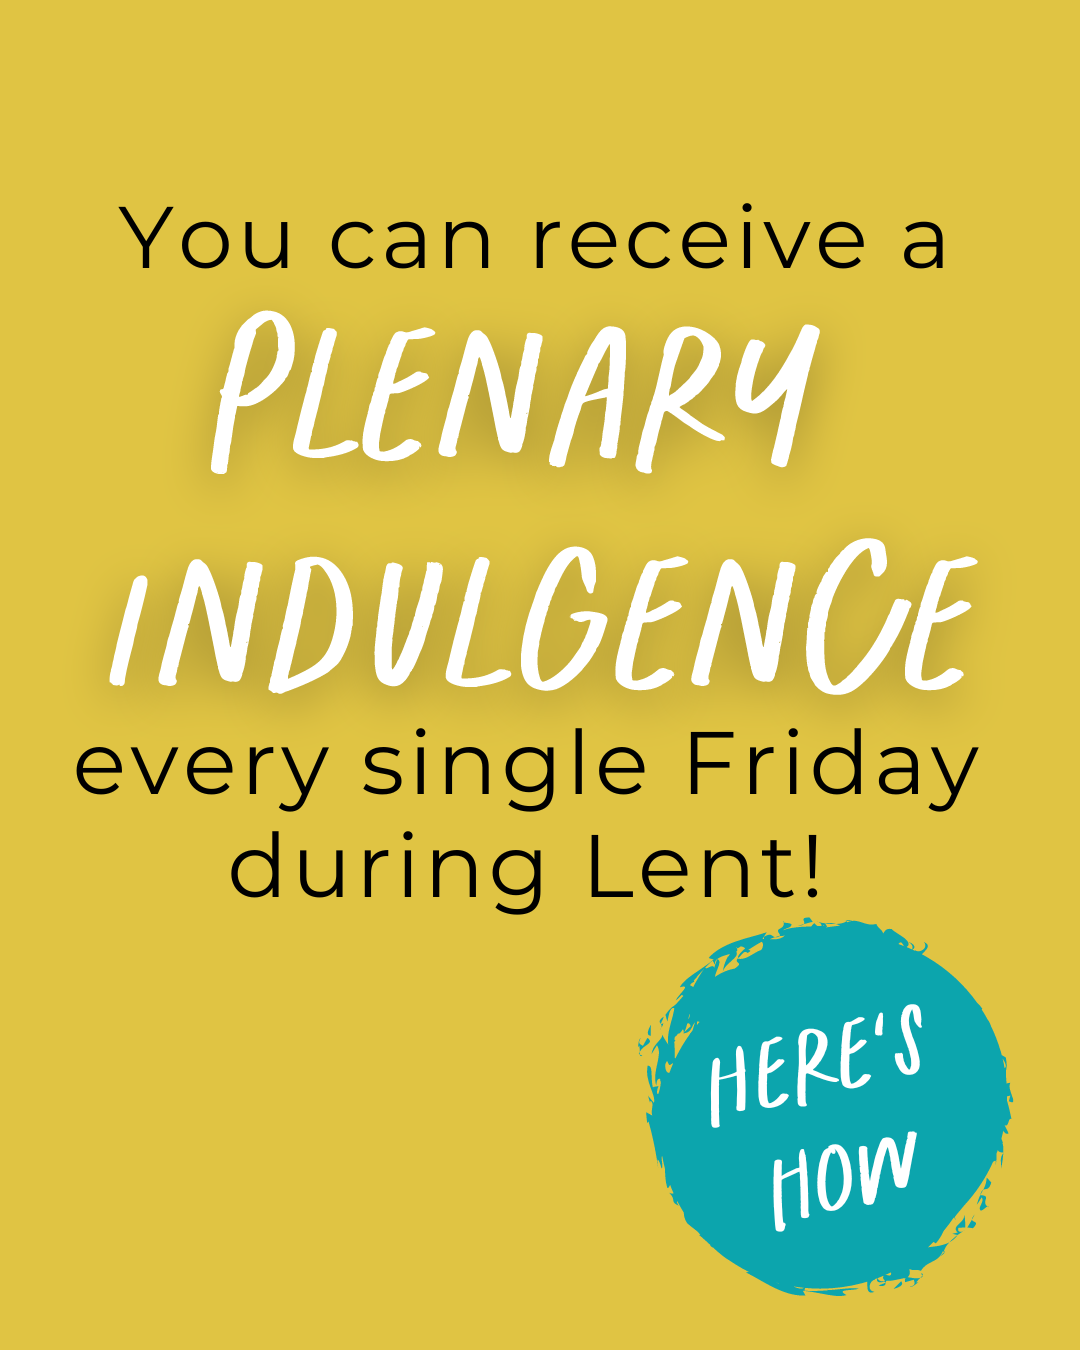 Here's How to Gain Plenary Indulgences During Lent